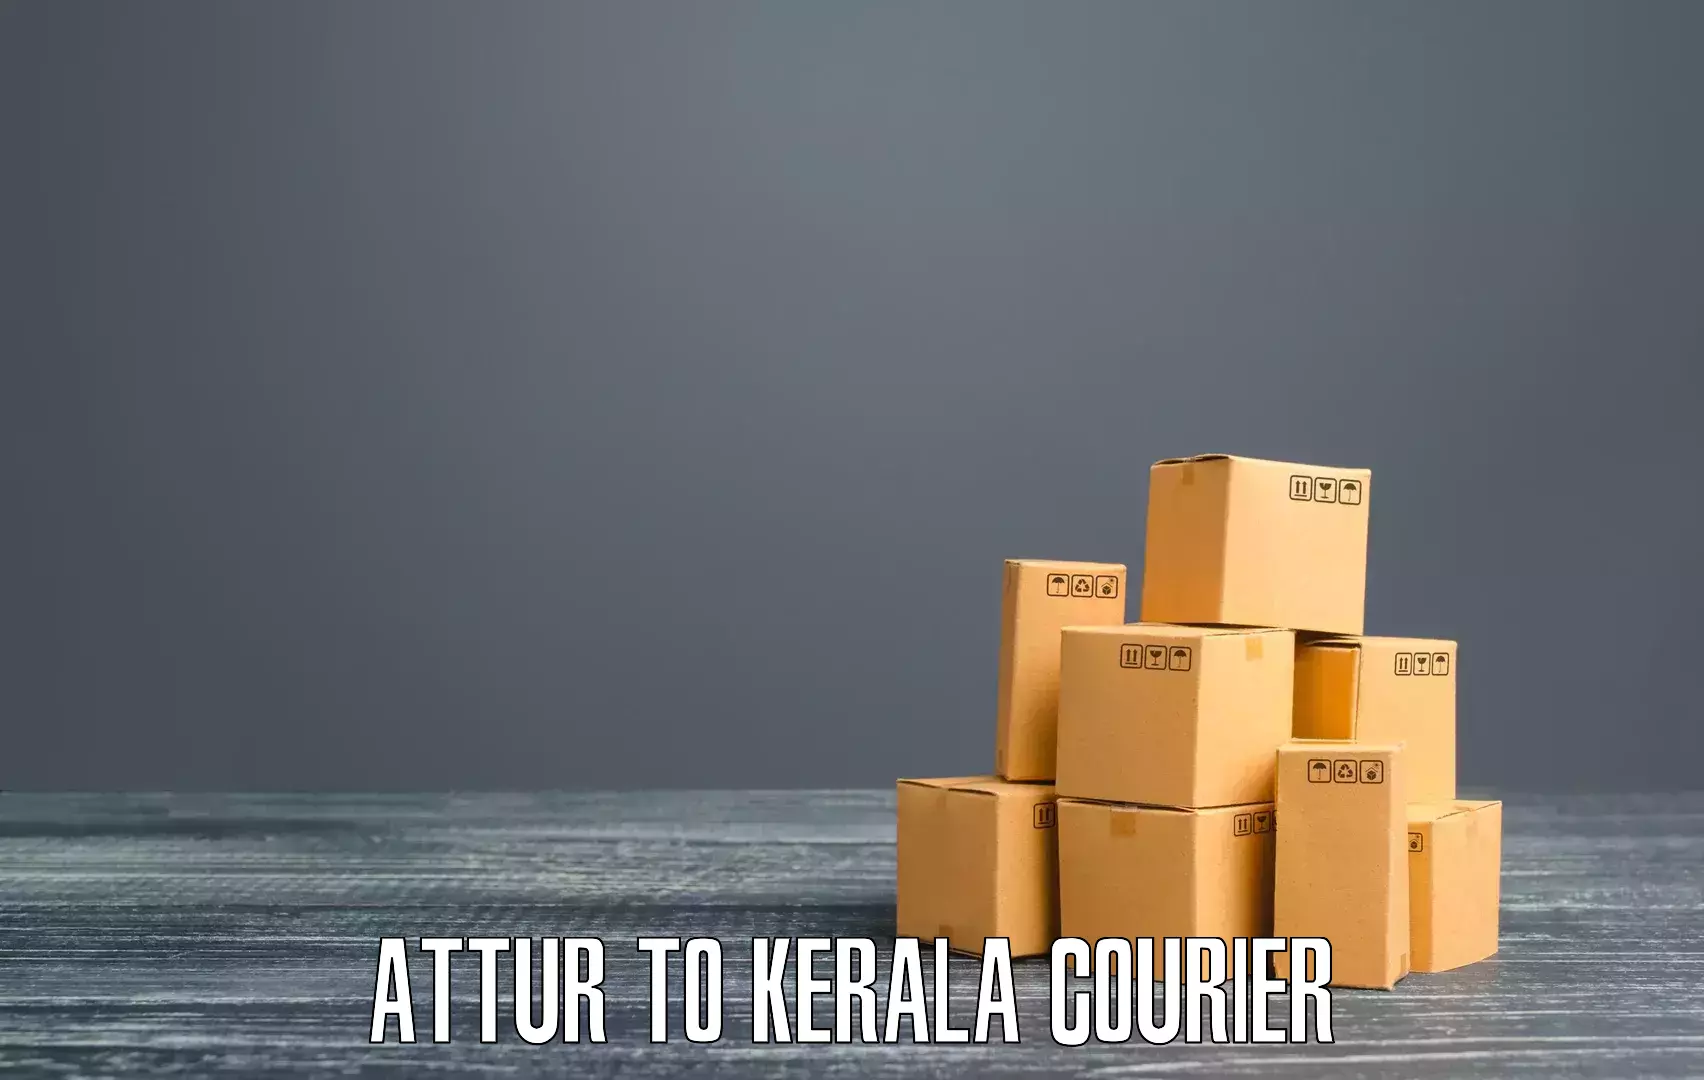 Global courier networks in Attur to Koothattukulam